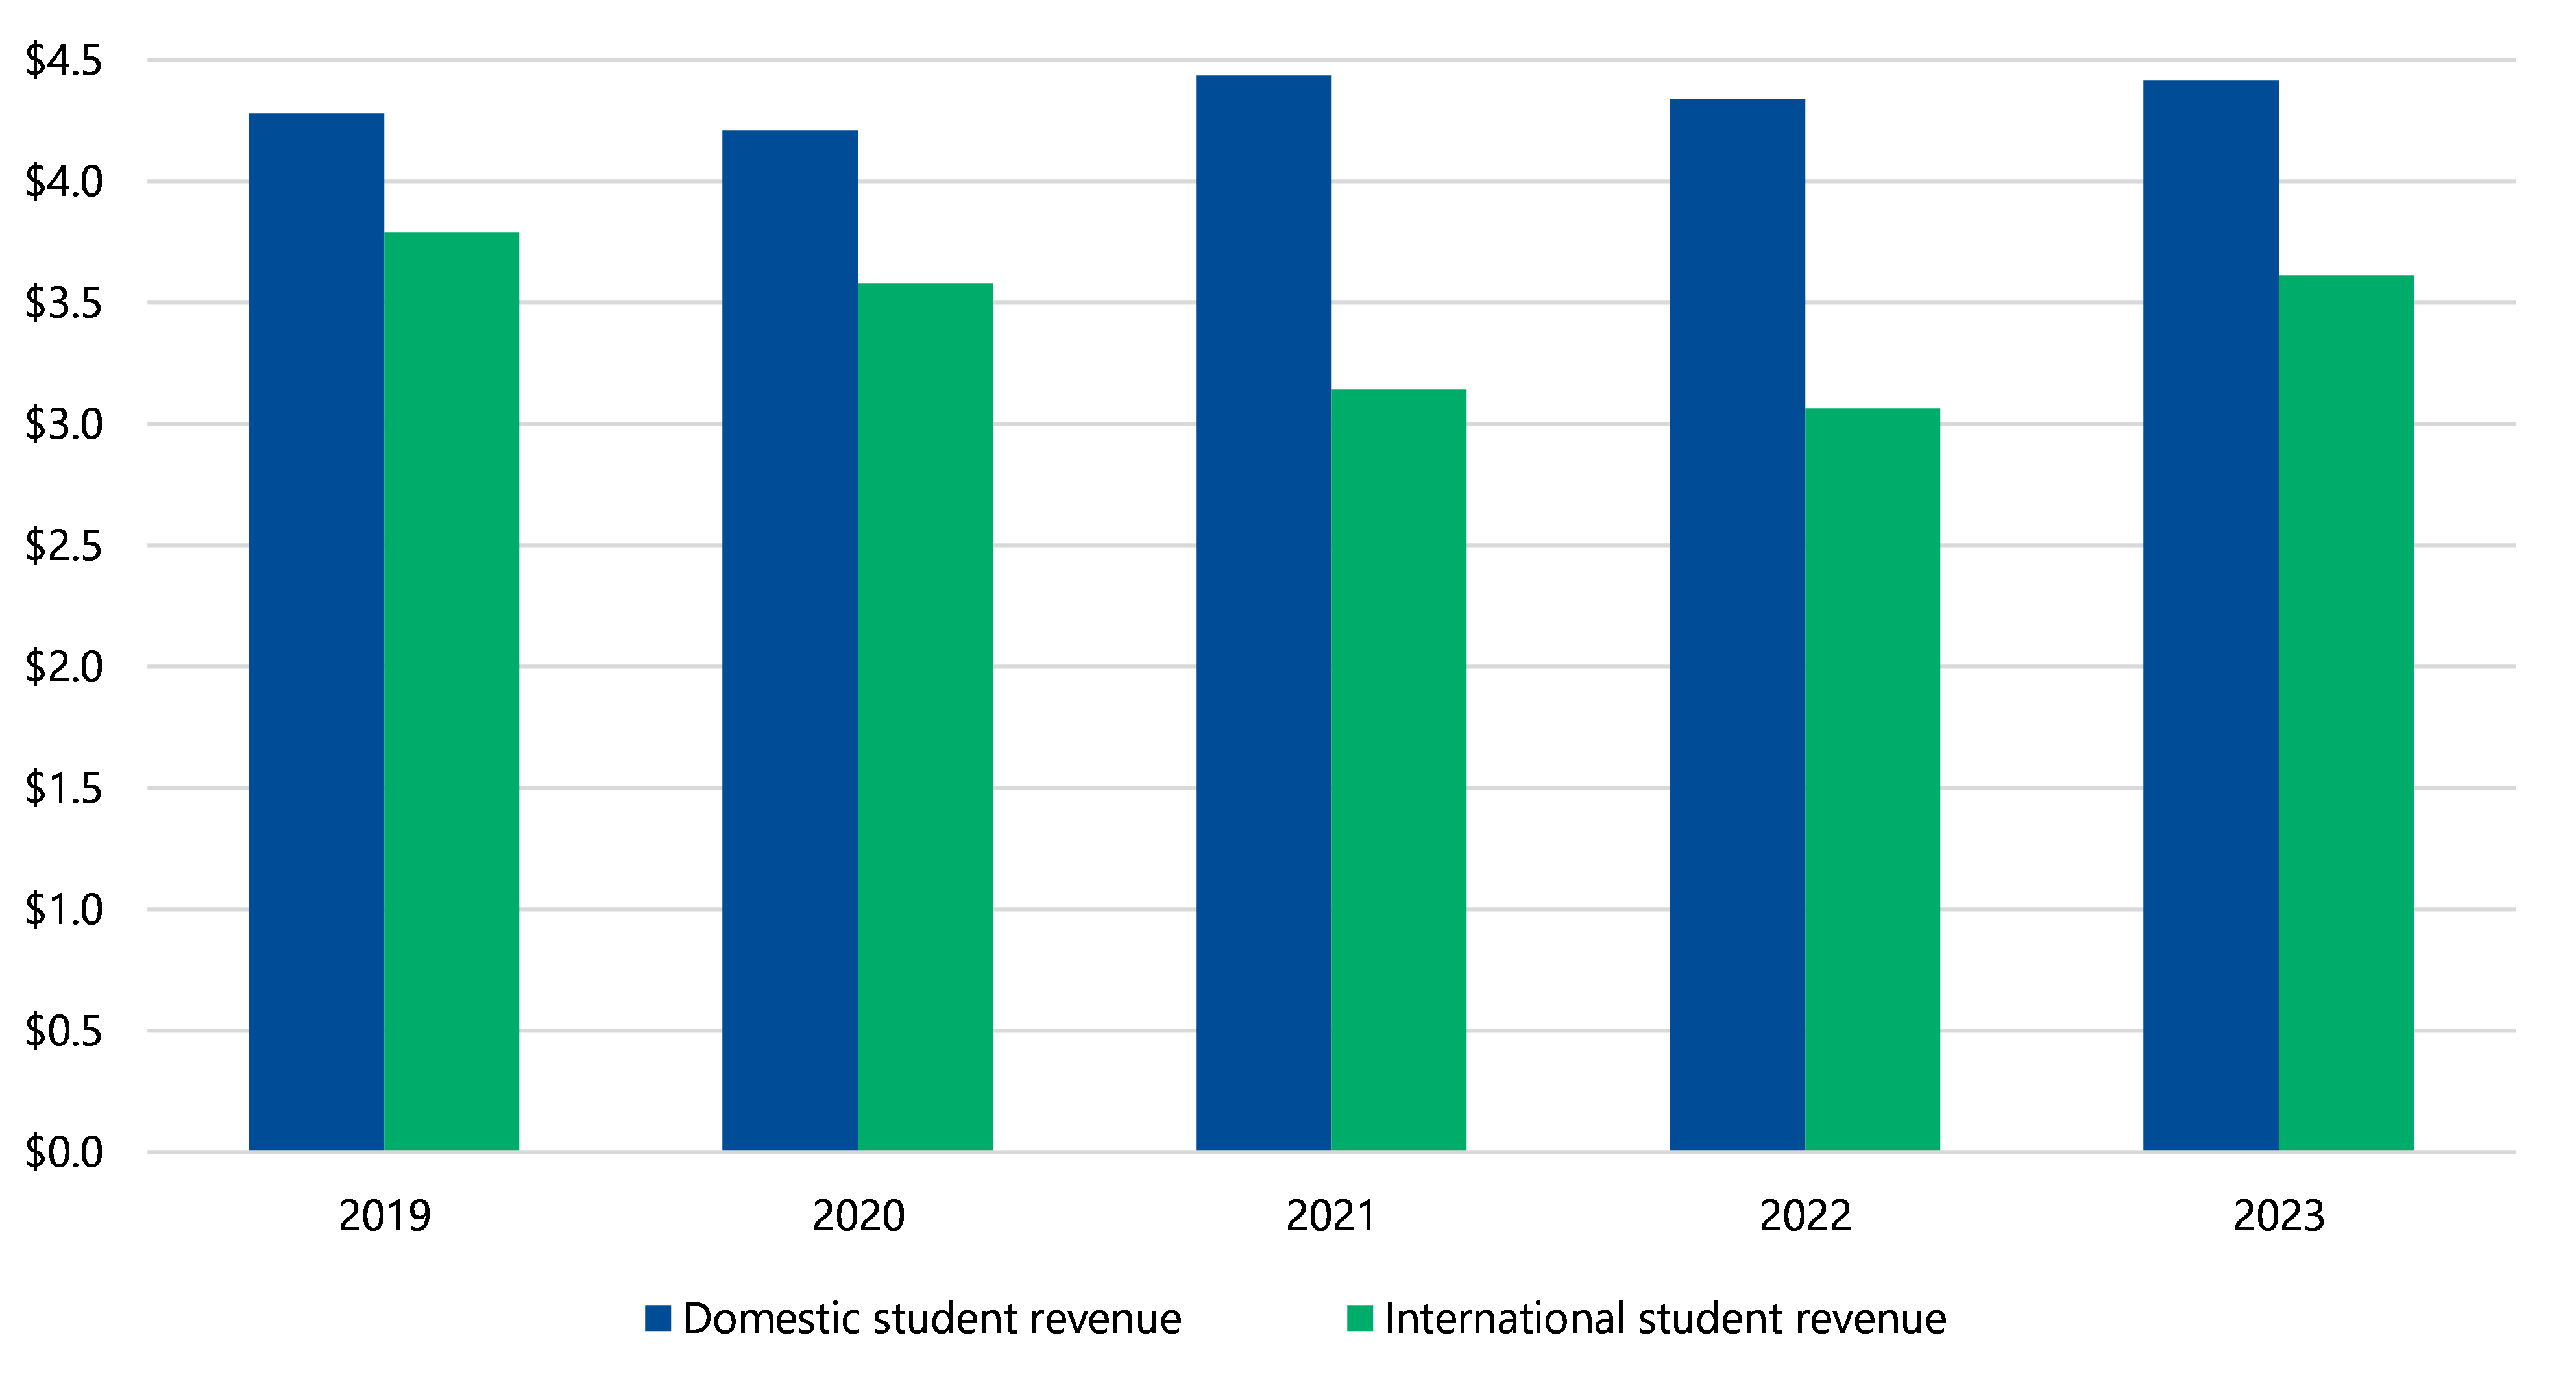 Figure 7 is a bar chart that shows universities’ student revenue earnings from 2019 to 2023. Domestic student revenue stayed between $4 billion and $4.5 billion from 2019 to 2023. International student revenue was between $3.5 billion and $4 billion in 2019 and 2020, between $3 billion and $3.5 billion in 2021 and 2022, and between $3.5 billion and $4 billion in 2023.